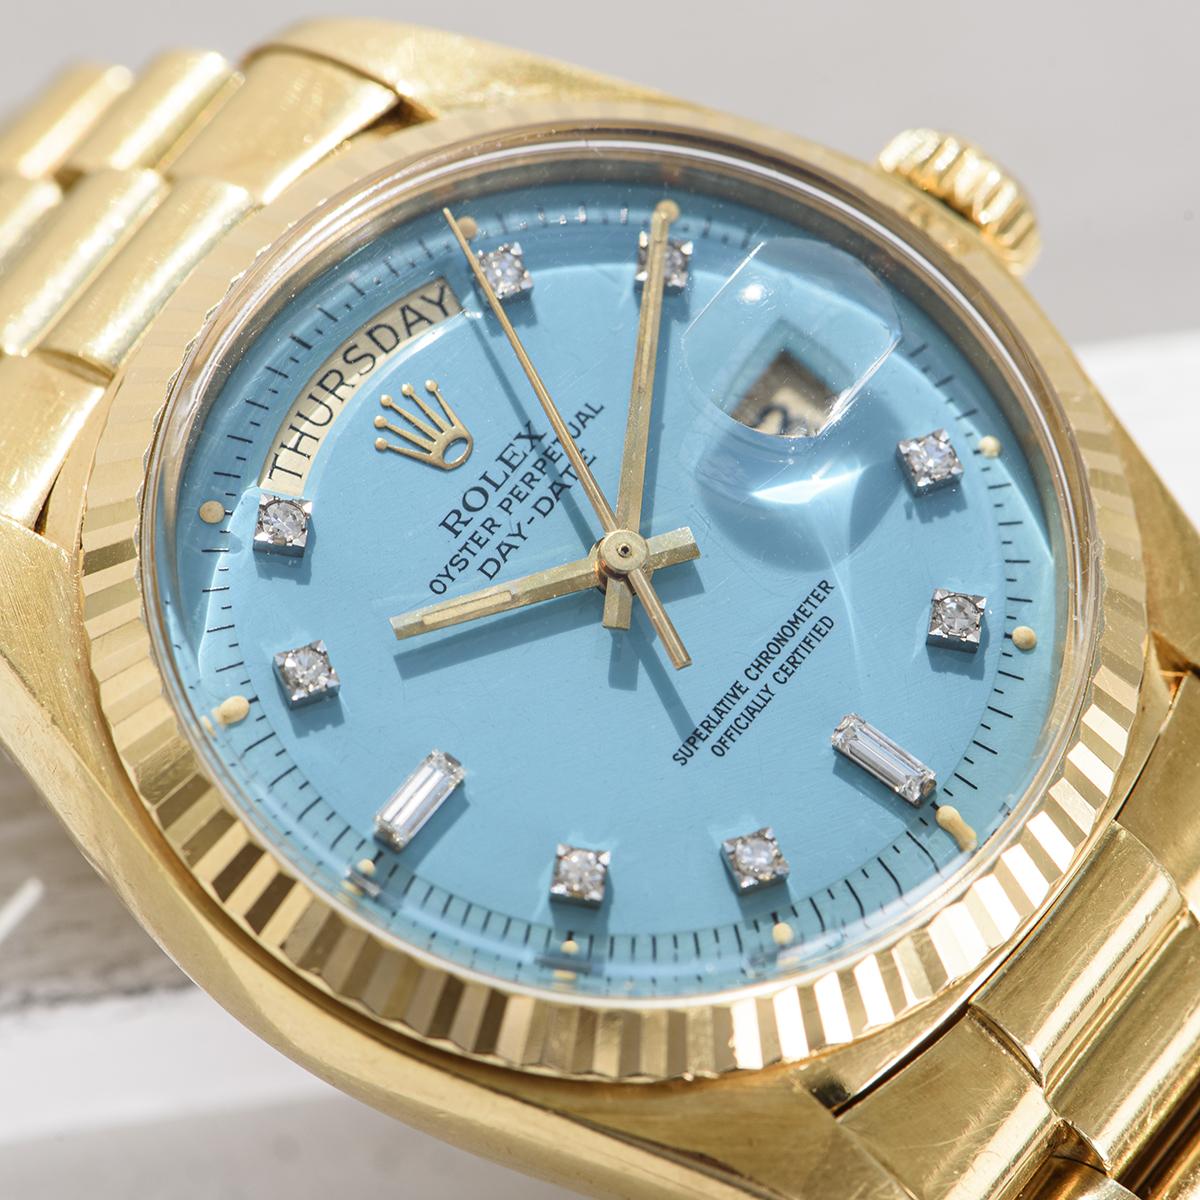 A vintage 36mm Day-Date in yellow gold by Rolex, featuring a rare turquoise Stella dial set with 2 baguette-cut and 8 round brilliant cut diamond hour markers. The fluted bezel, president bracelet and concealed folding Crownclasp are distinctive